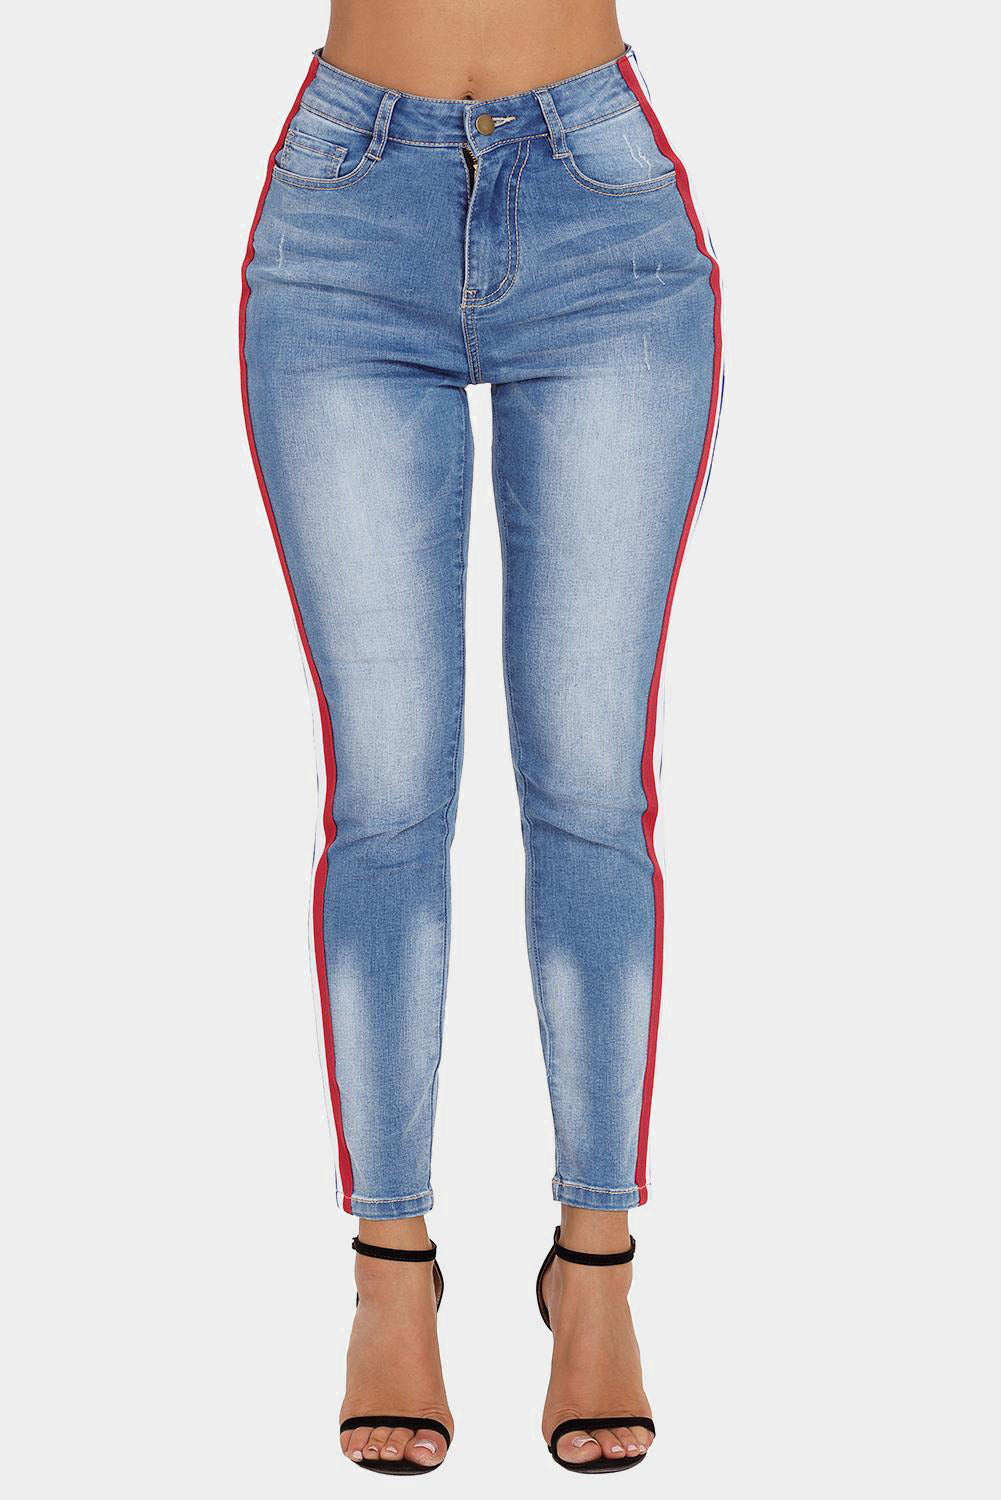 Racer stripe jeans with red, white and blue